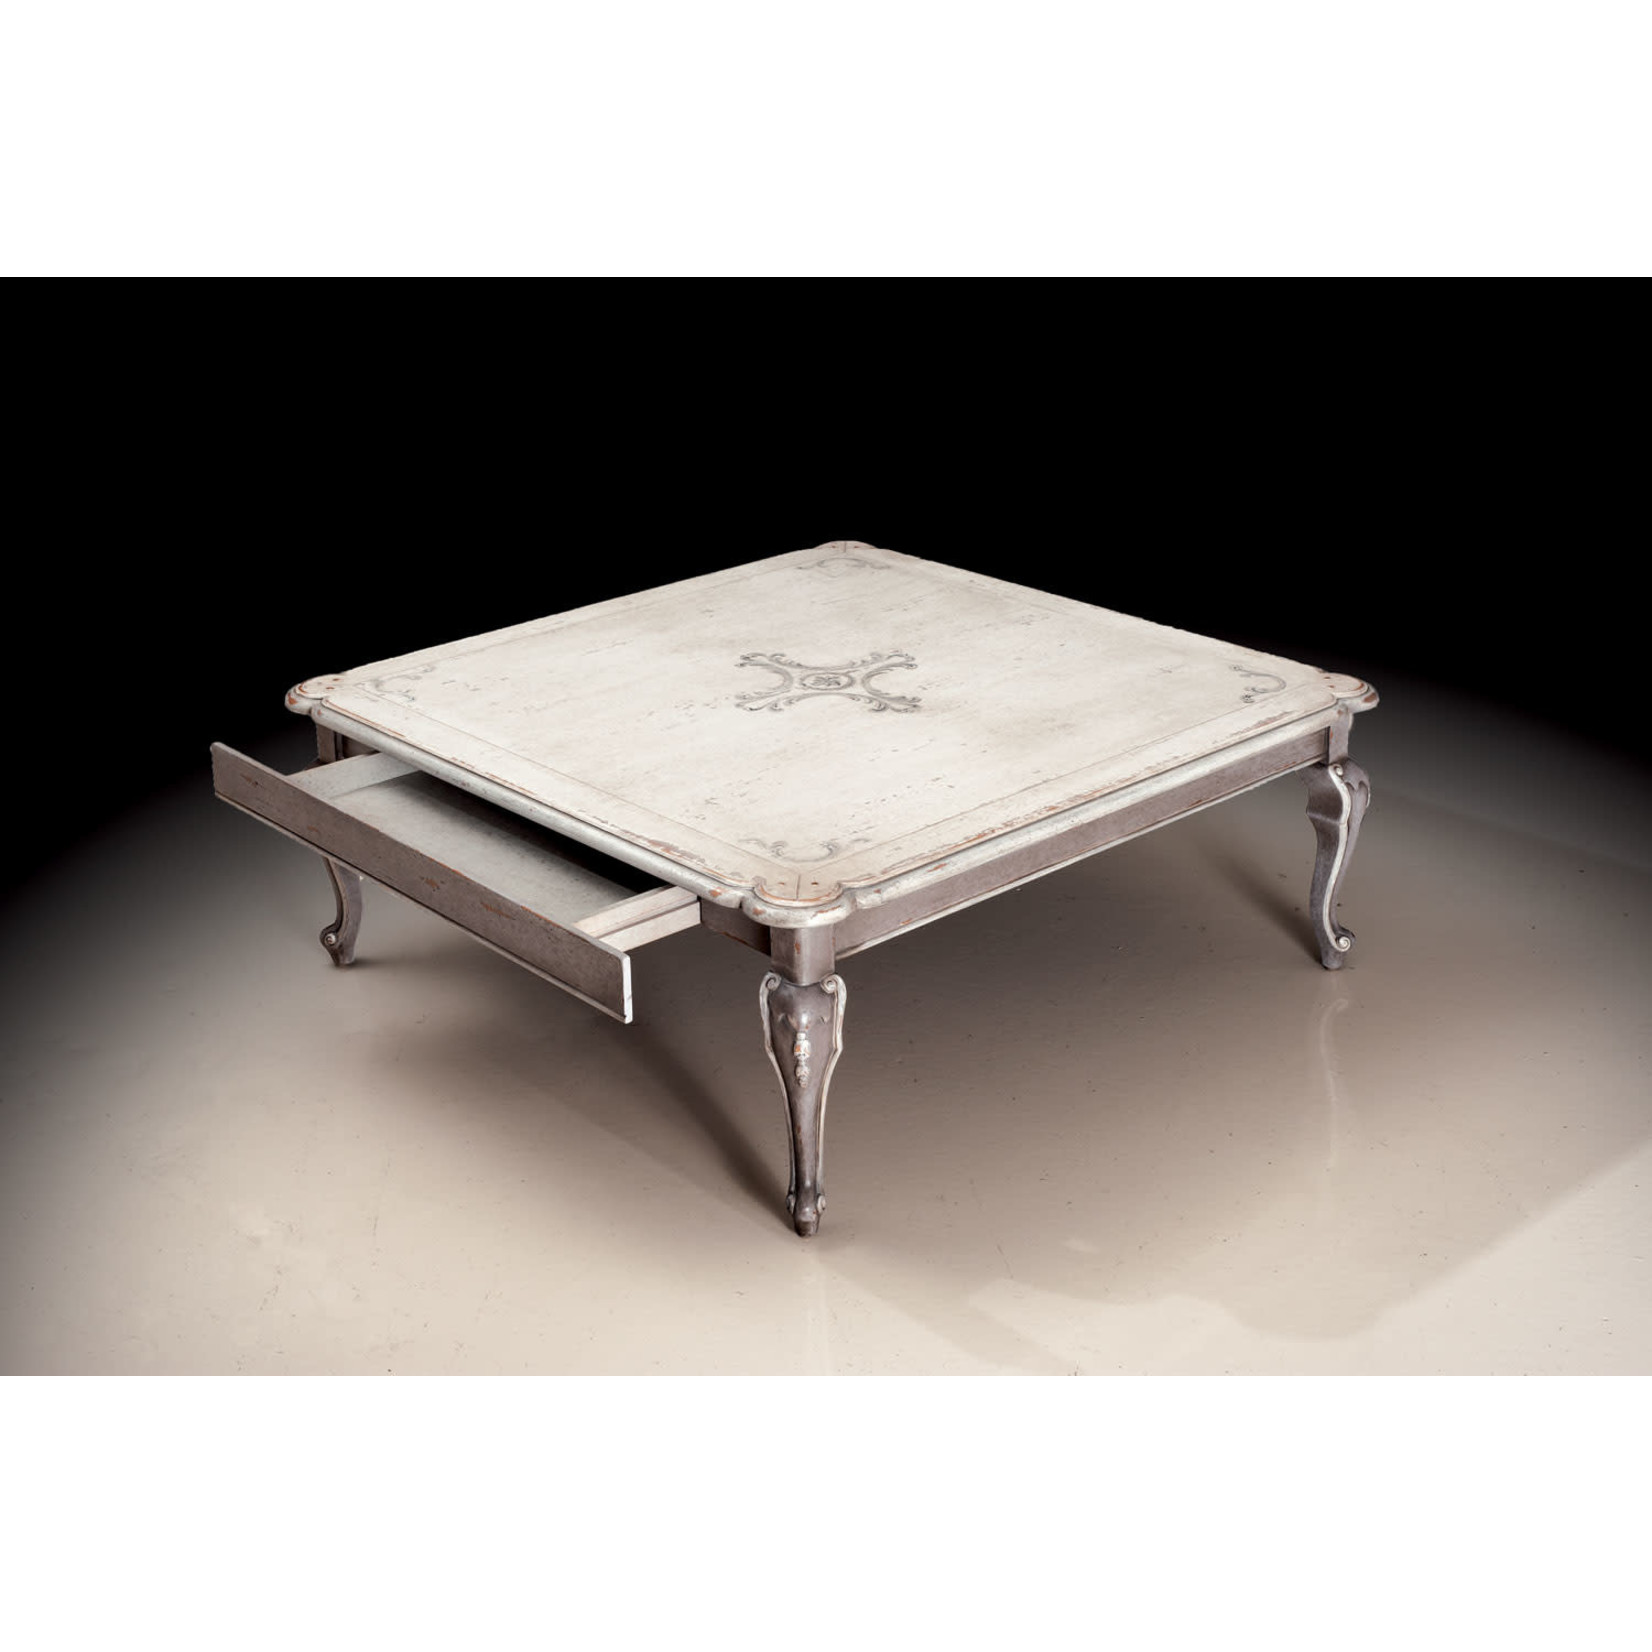 David Michael Painted Square Coffee Table Antique White & Gray Hand-Painted Medallion Top